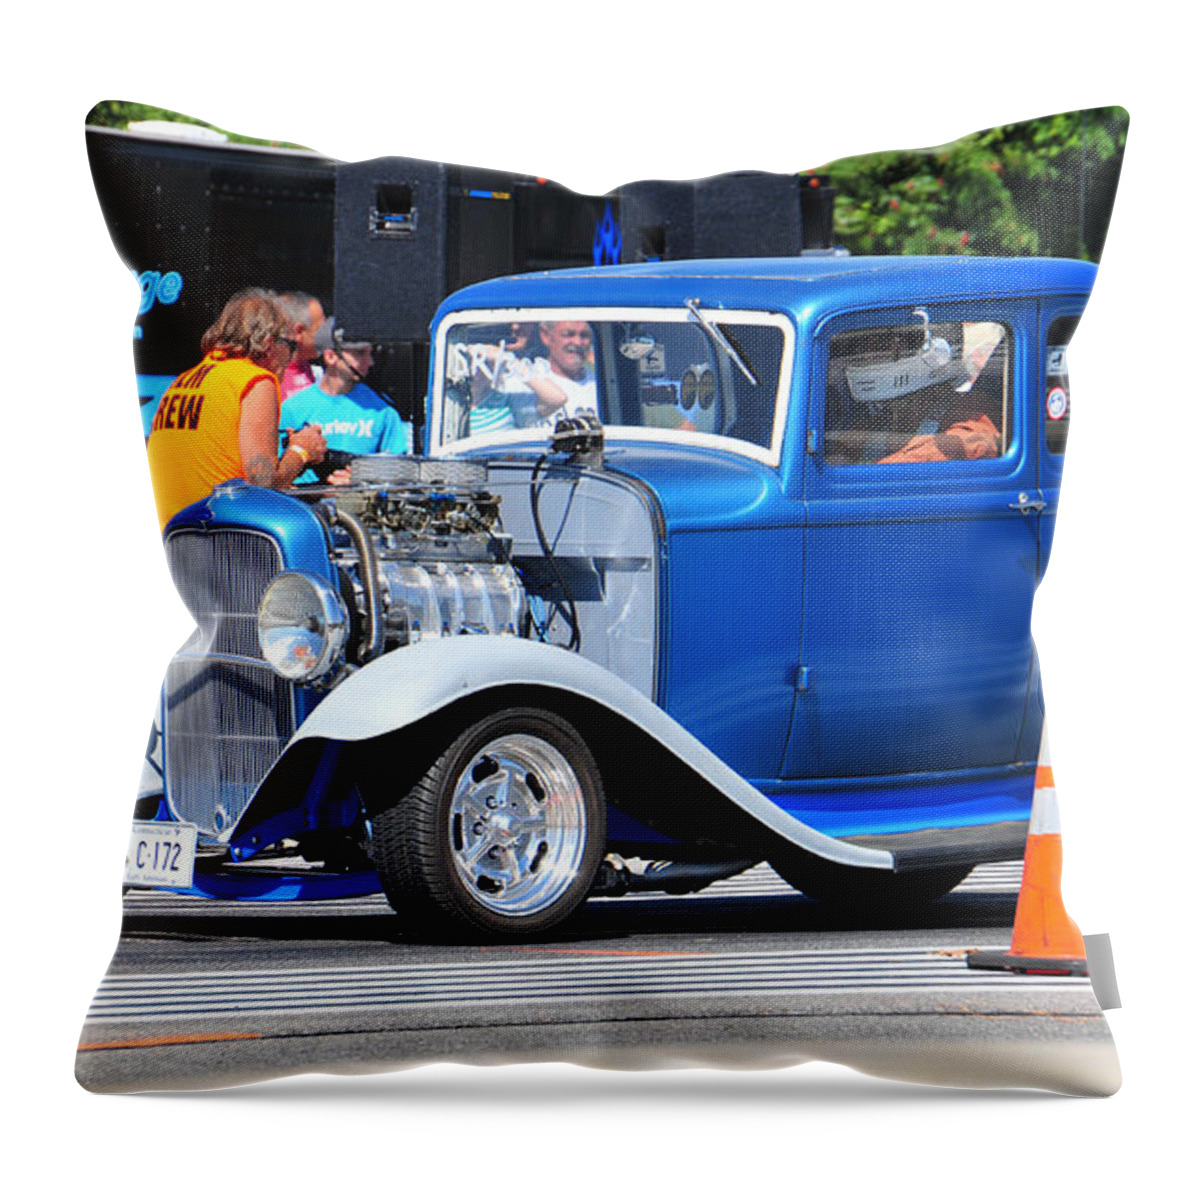 Drag Throw Pillow featuring the photograph Hot Rod Dragster by Mike Martin